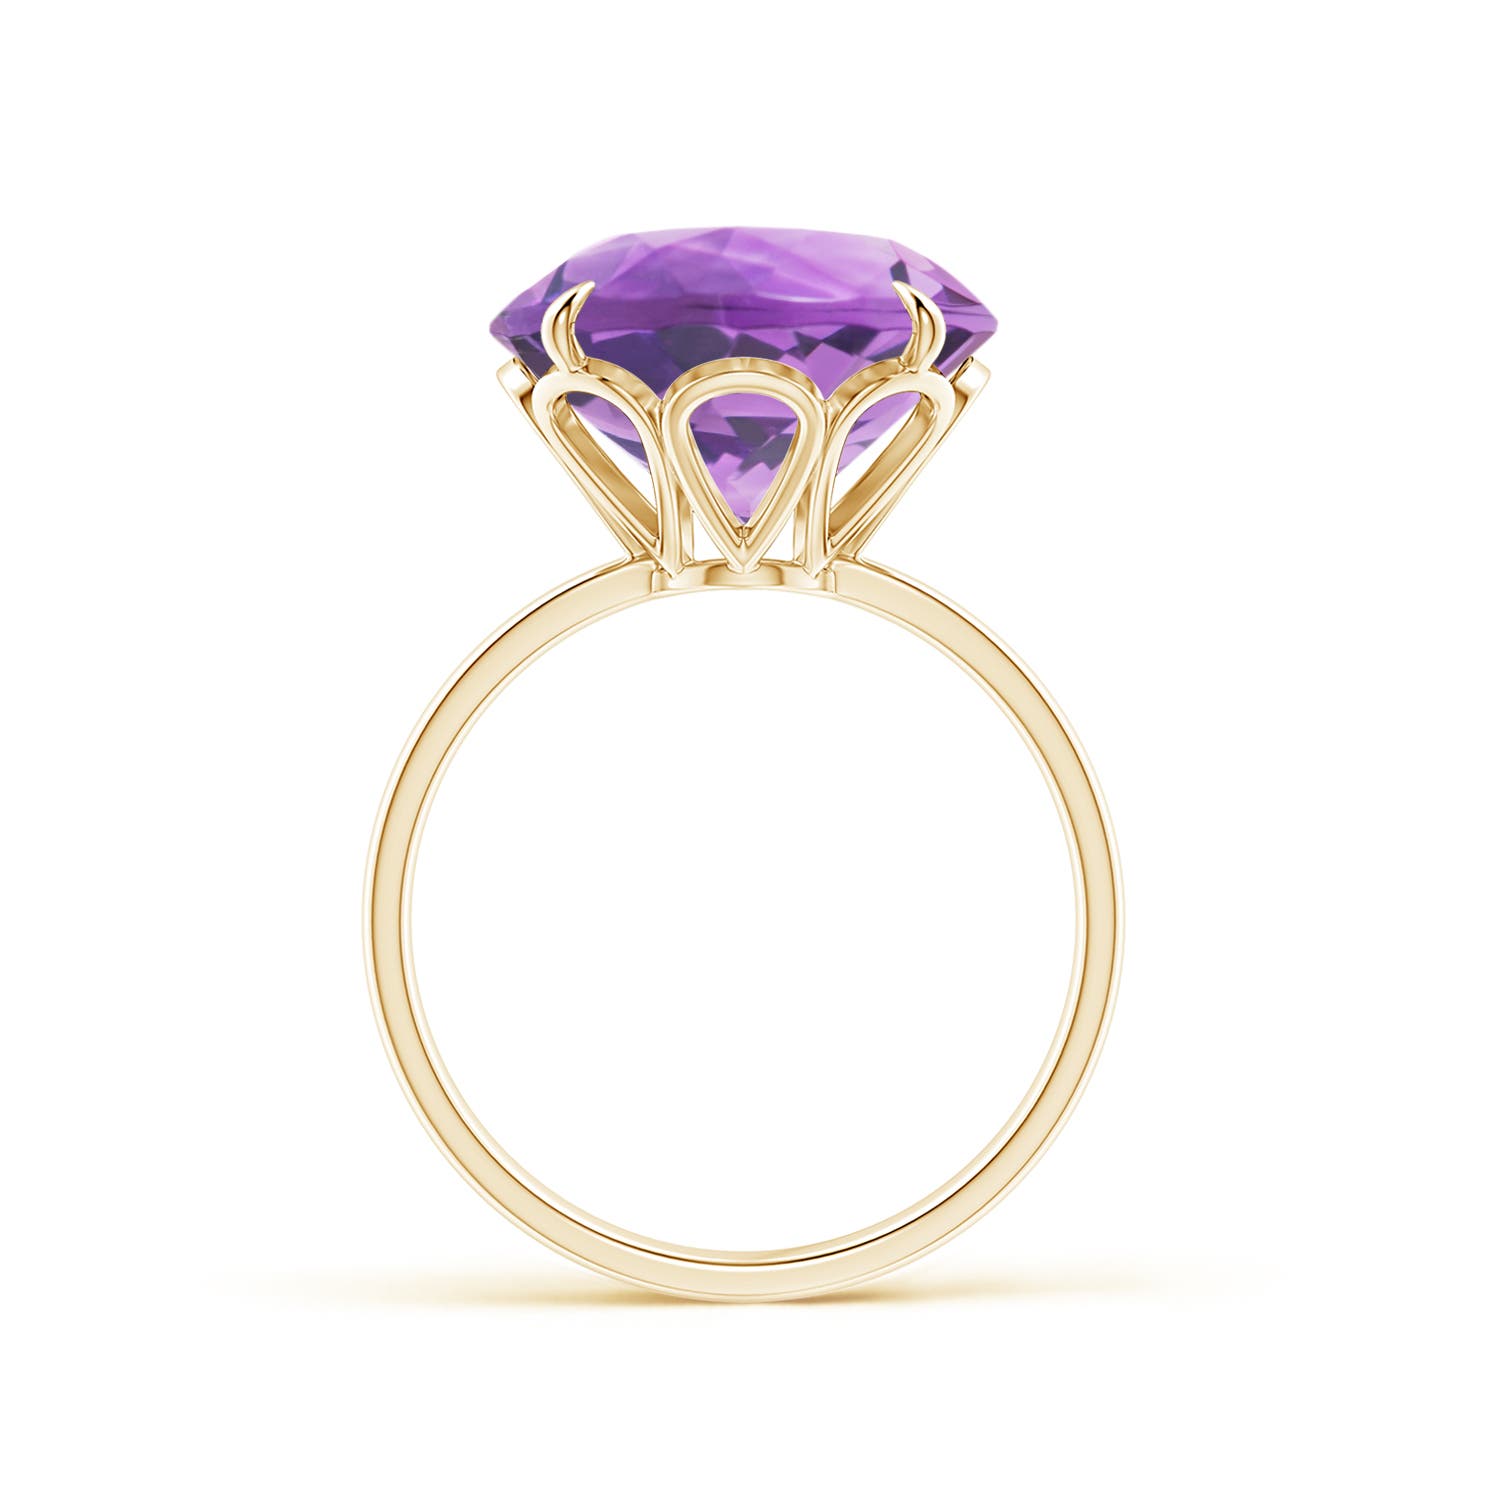 A - Amethyst / 7.2 CT / 14 KT Yellow Gold